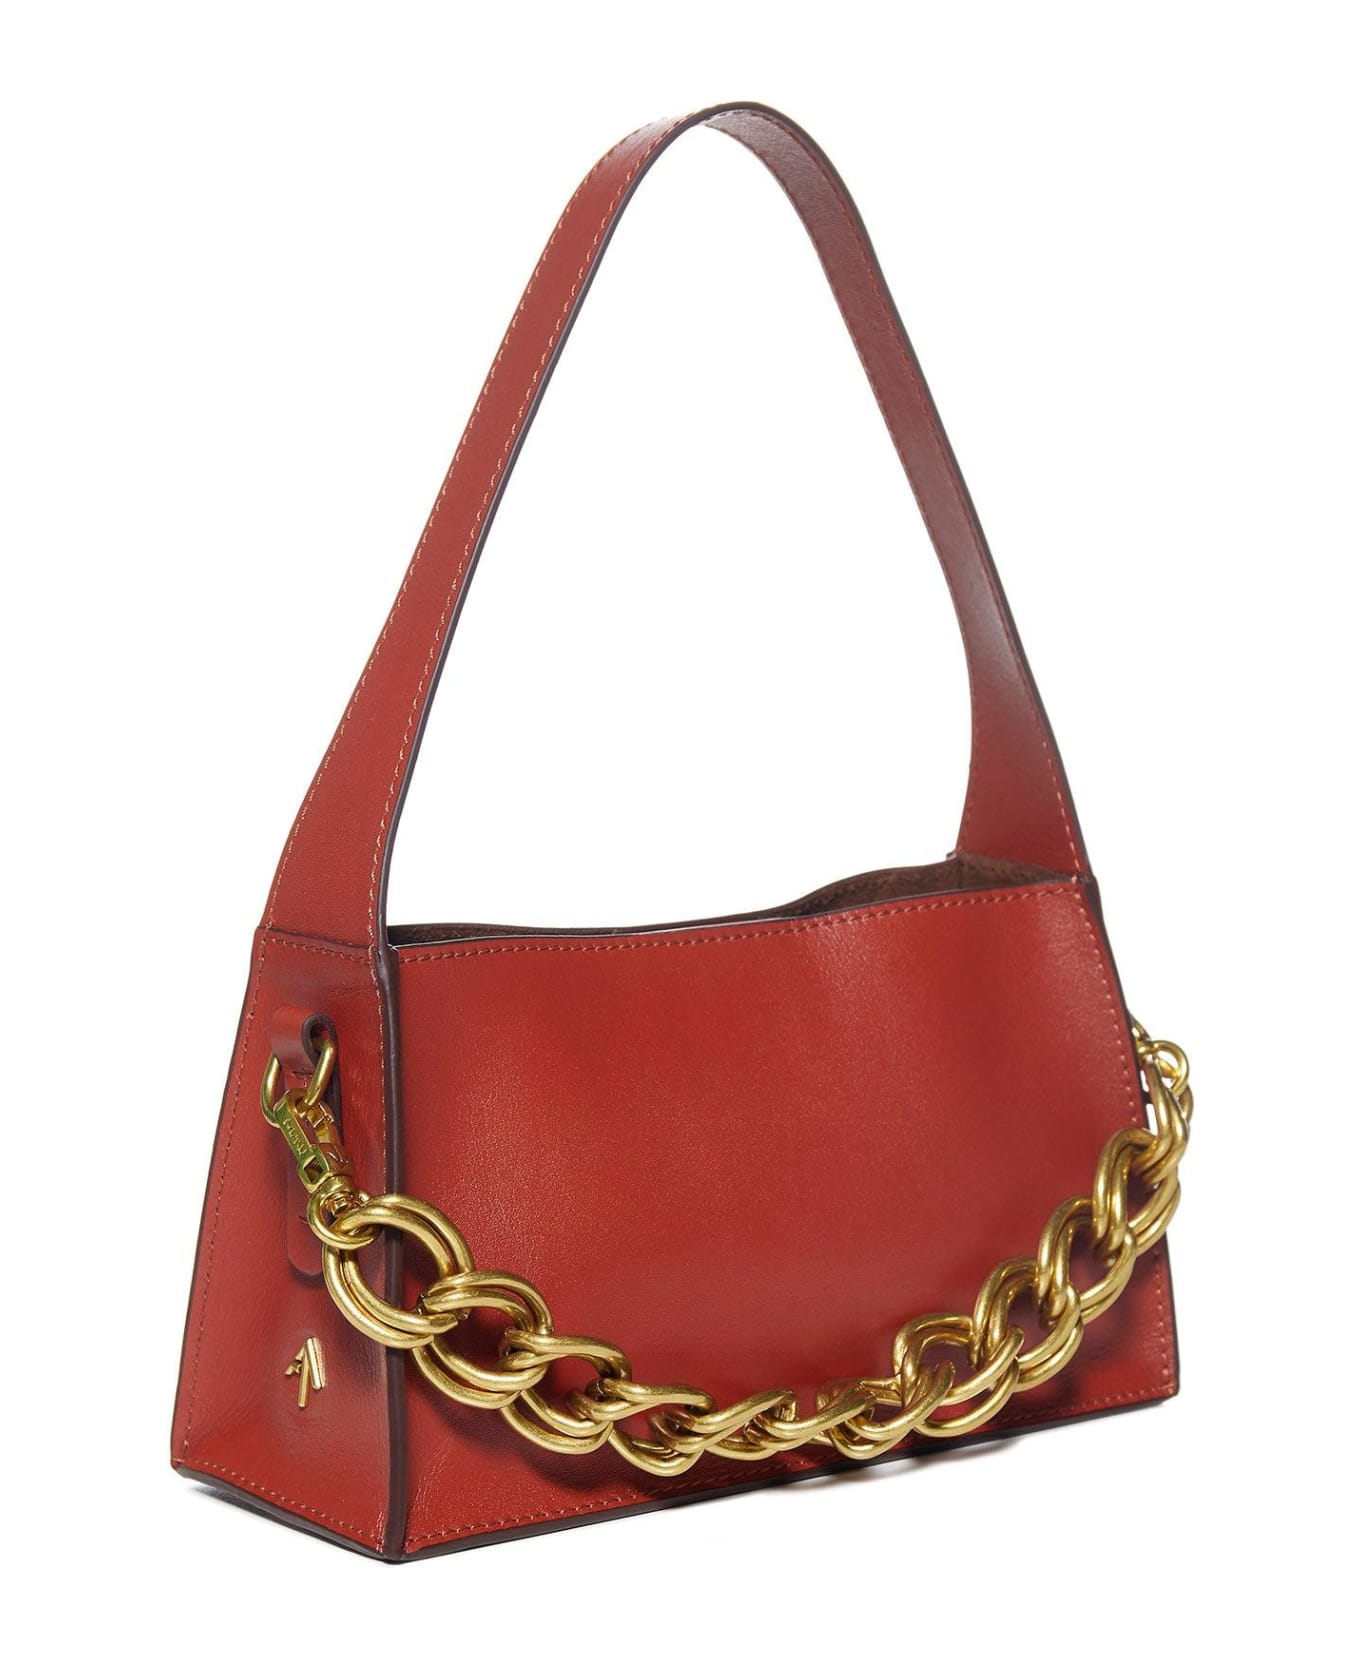 MANU Atelier Chained Shoulder Bag - Cuoio